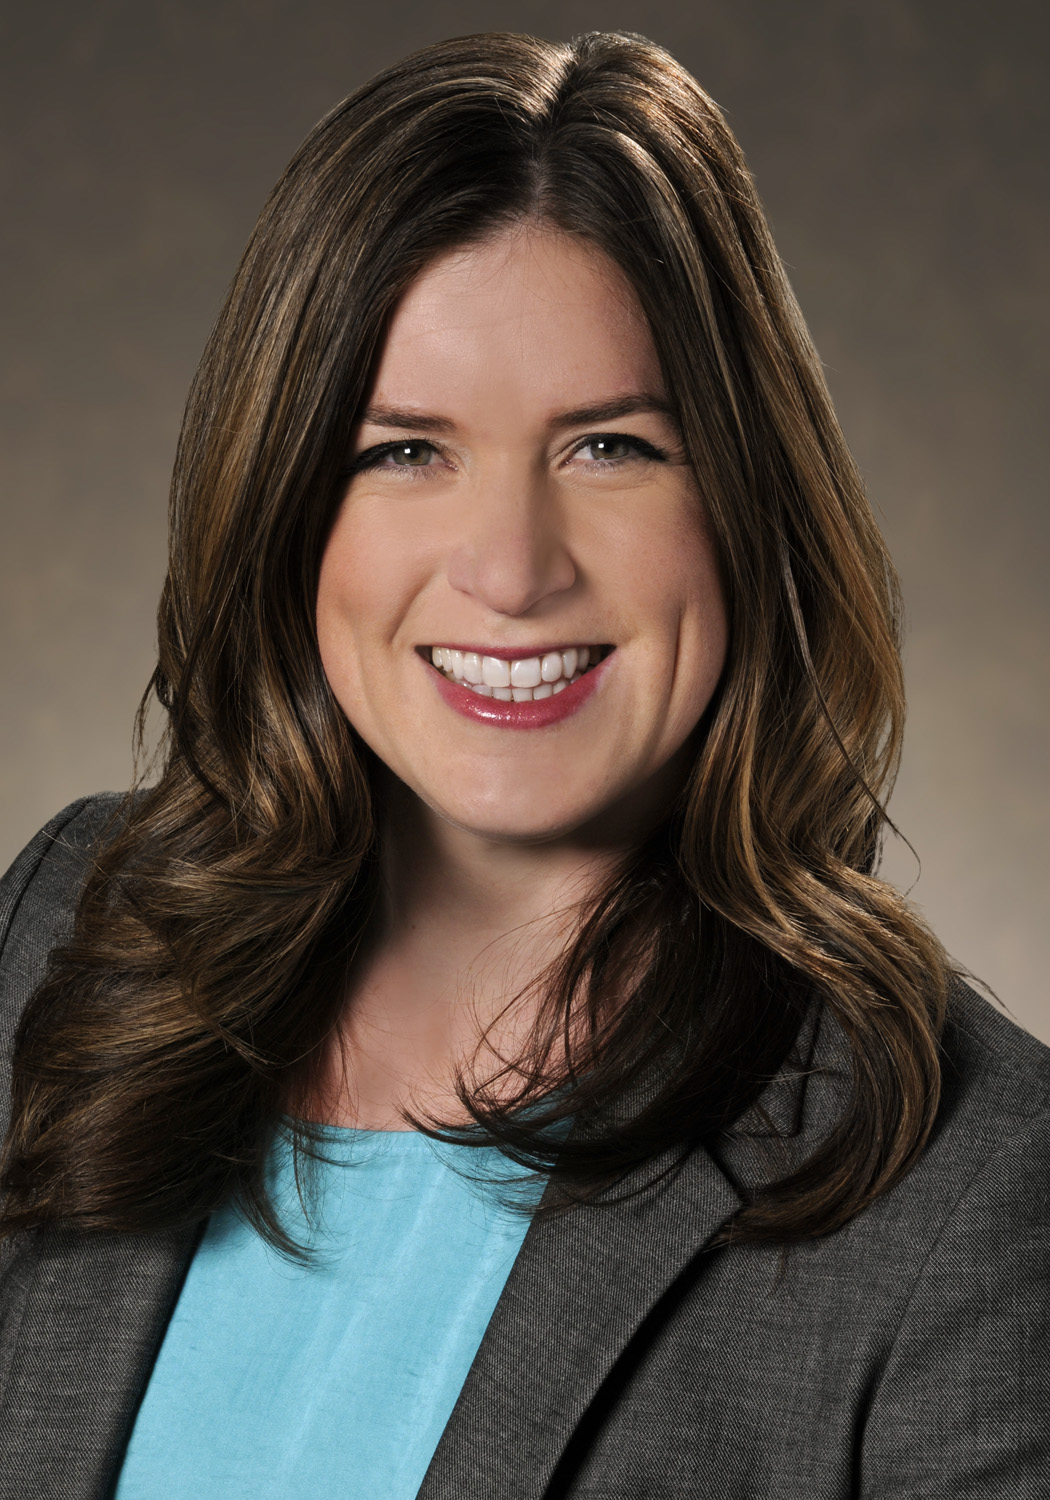 Meet Kristin Holthus, CPA from Anton Collins Mitchell LLP